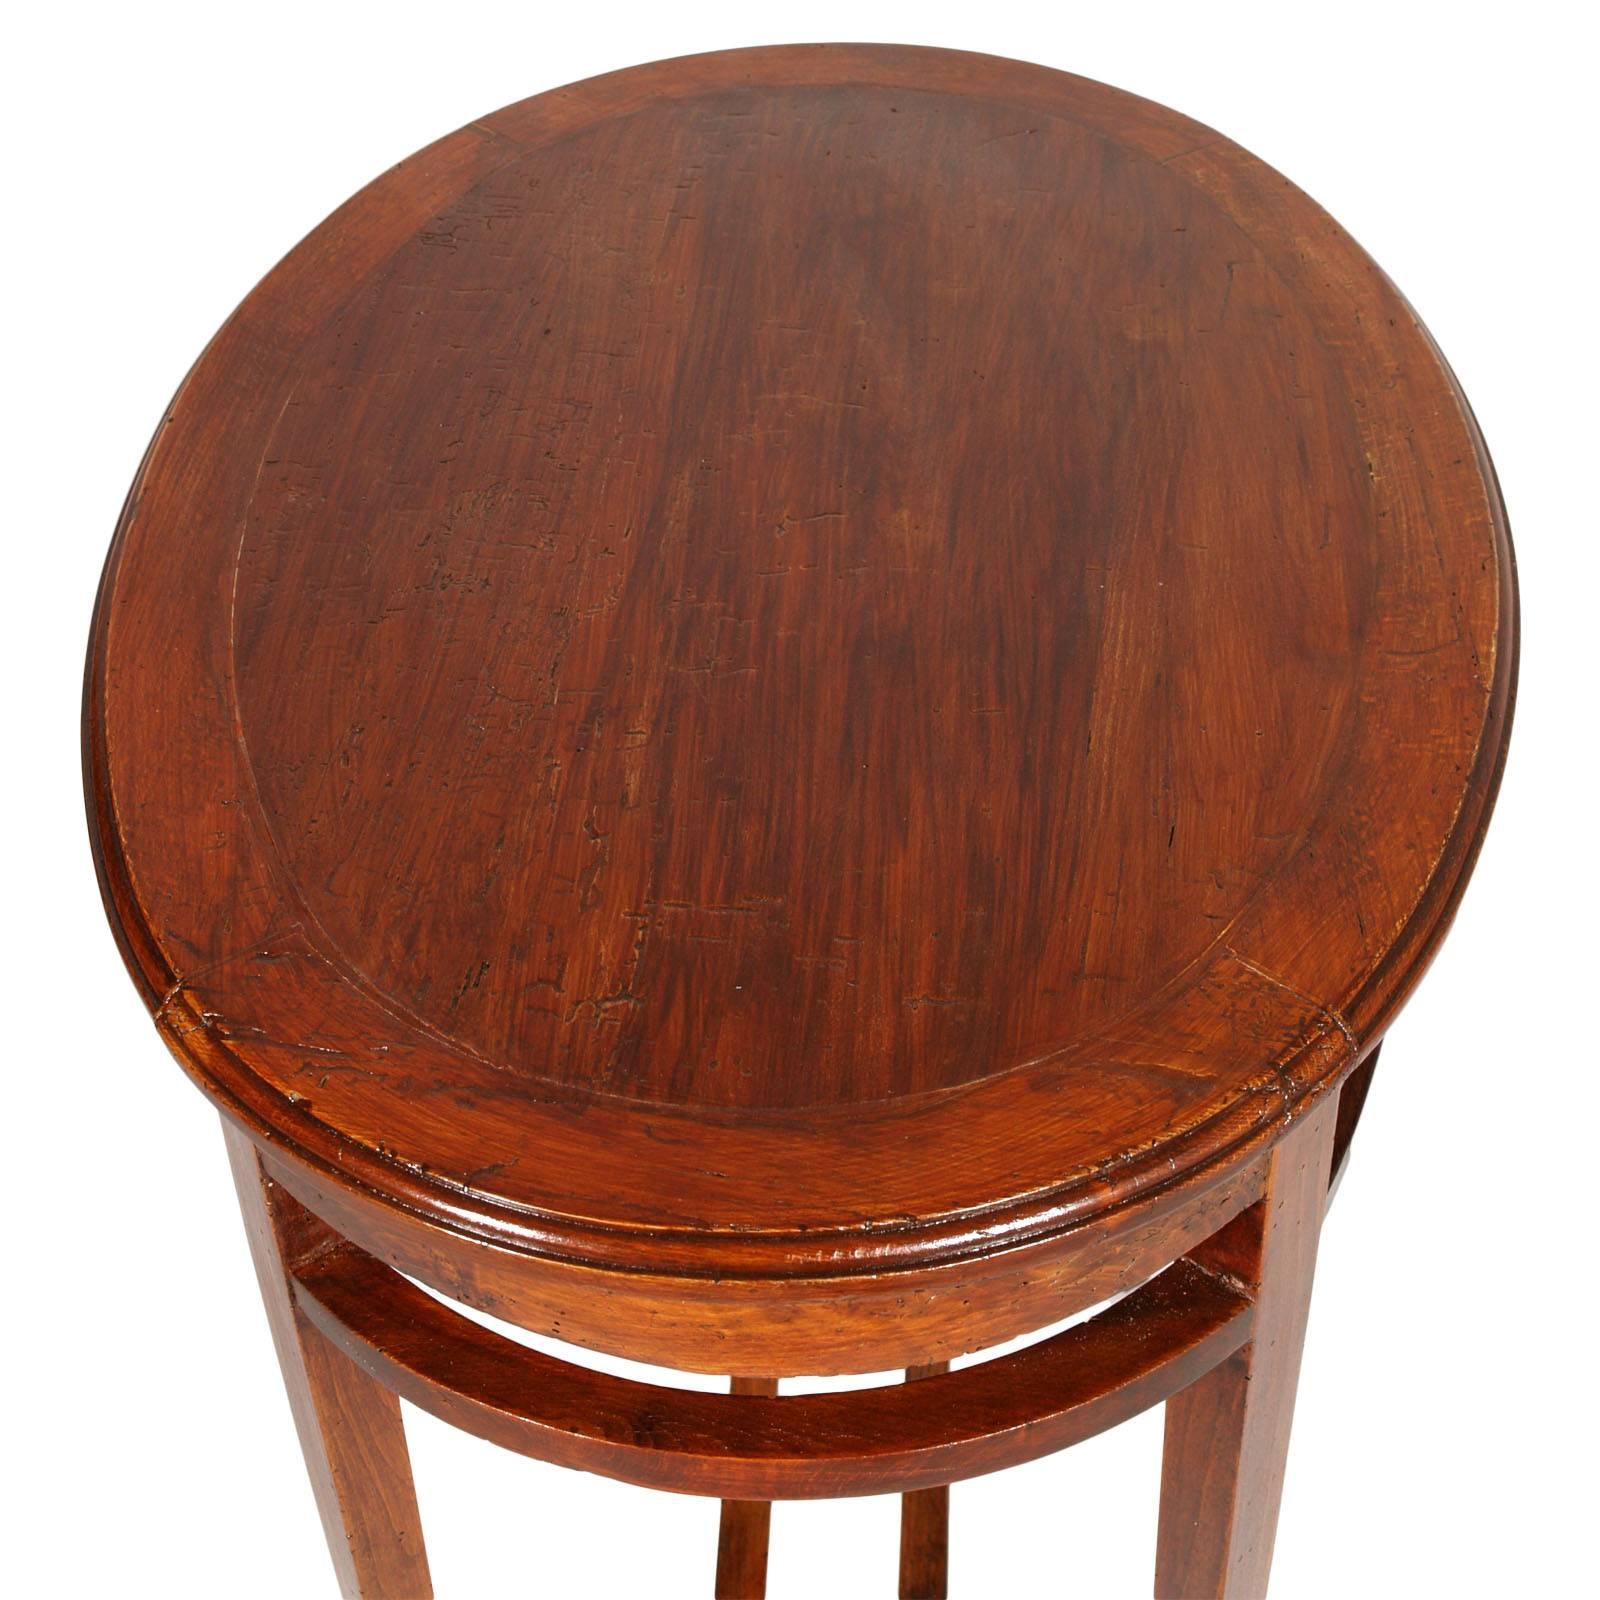 1910s Oval Viennese Occasional Table by Wiener Werkstätte, Solid Walnut Restored In Excellent Condition For Sale In Vigonza, Padua